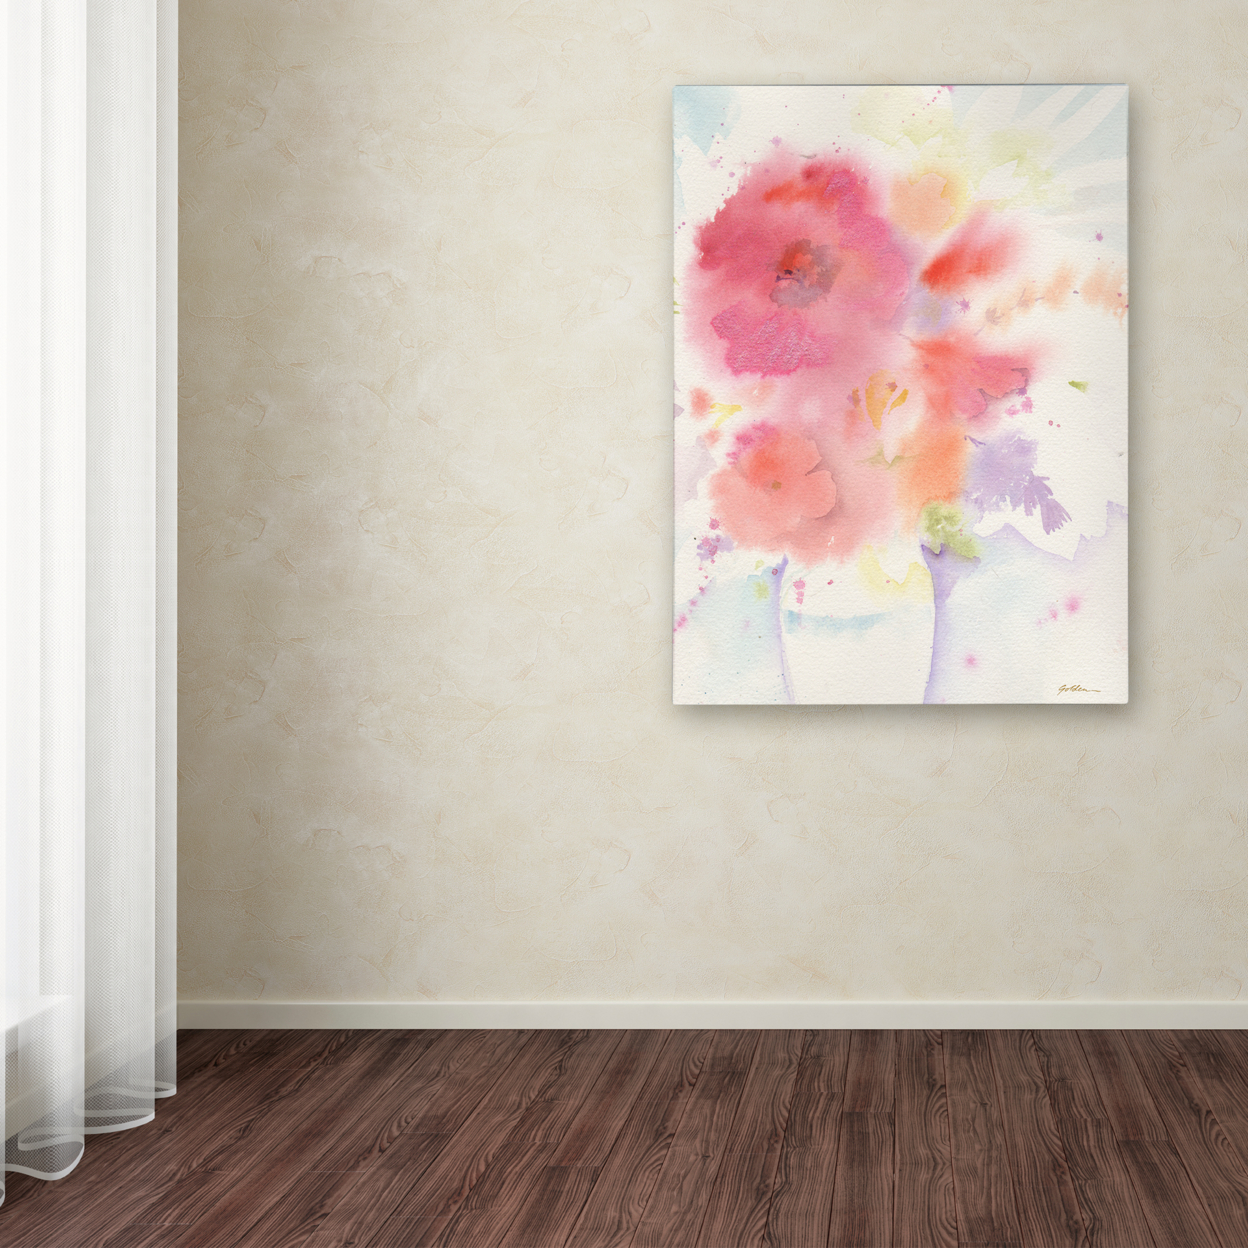 Sheila Golden 'The White Vase' Canvas Wall Art 35 X 47 Inches